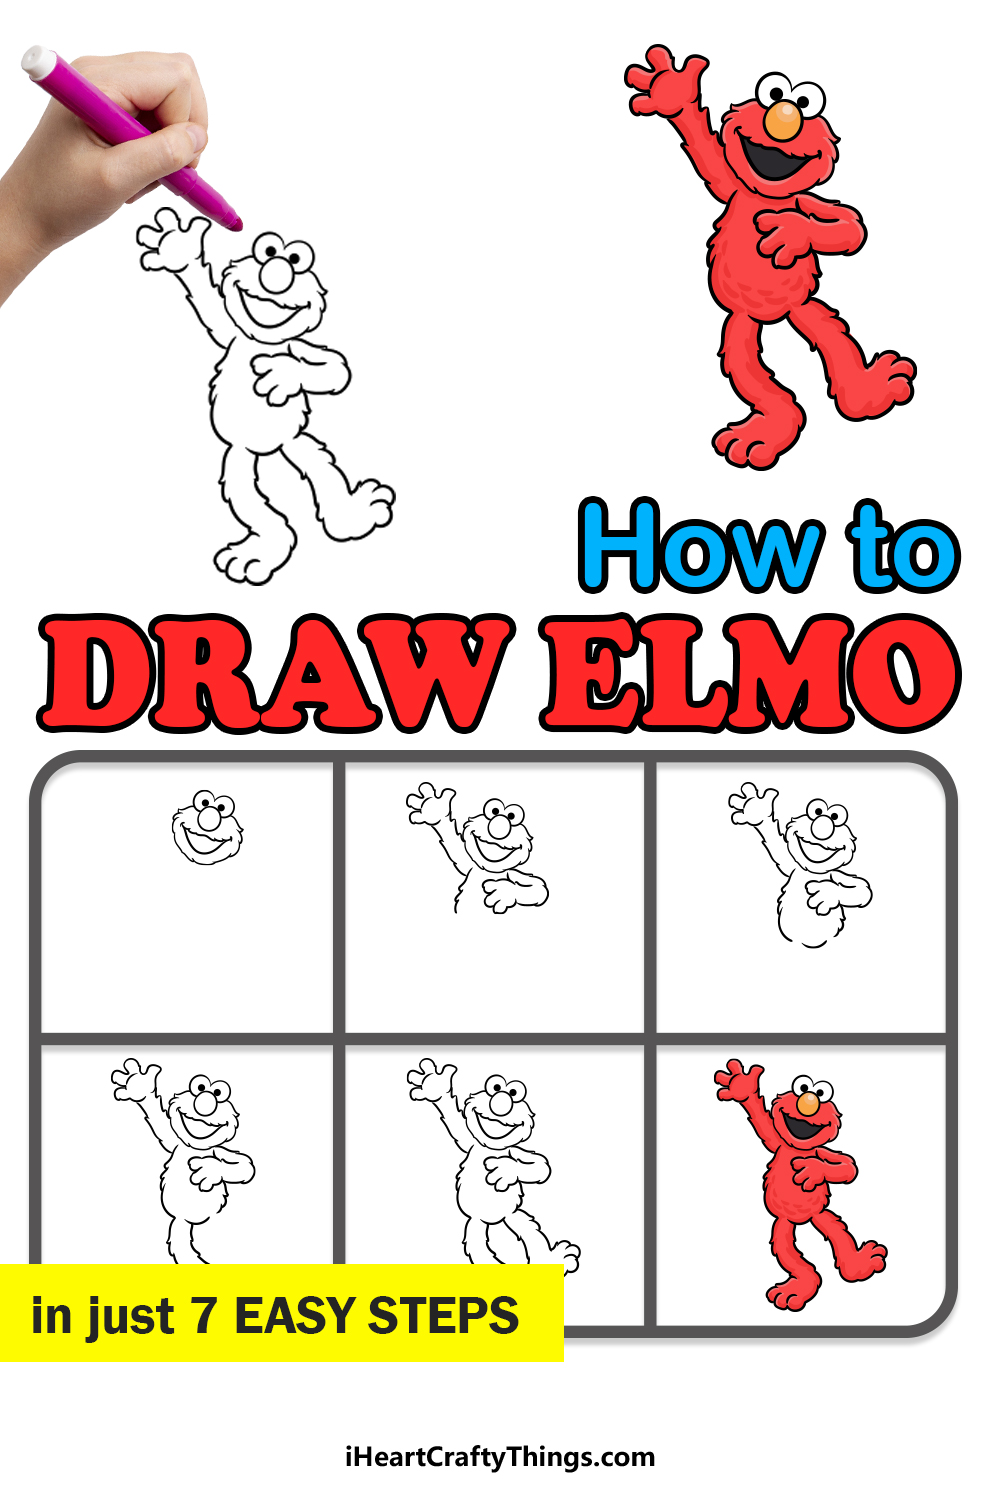 how to draw elmo in 7 easy steps